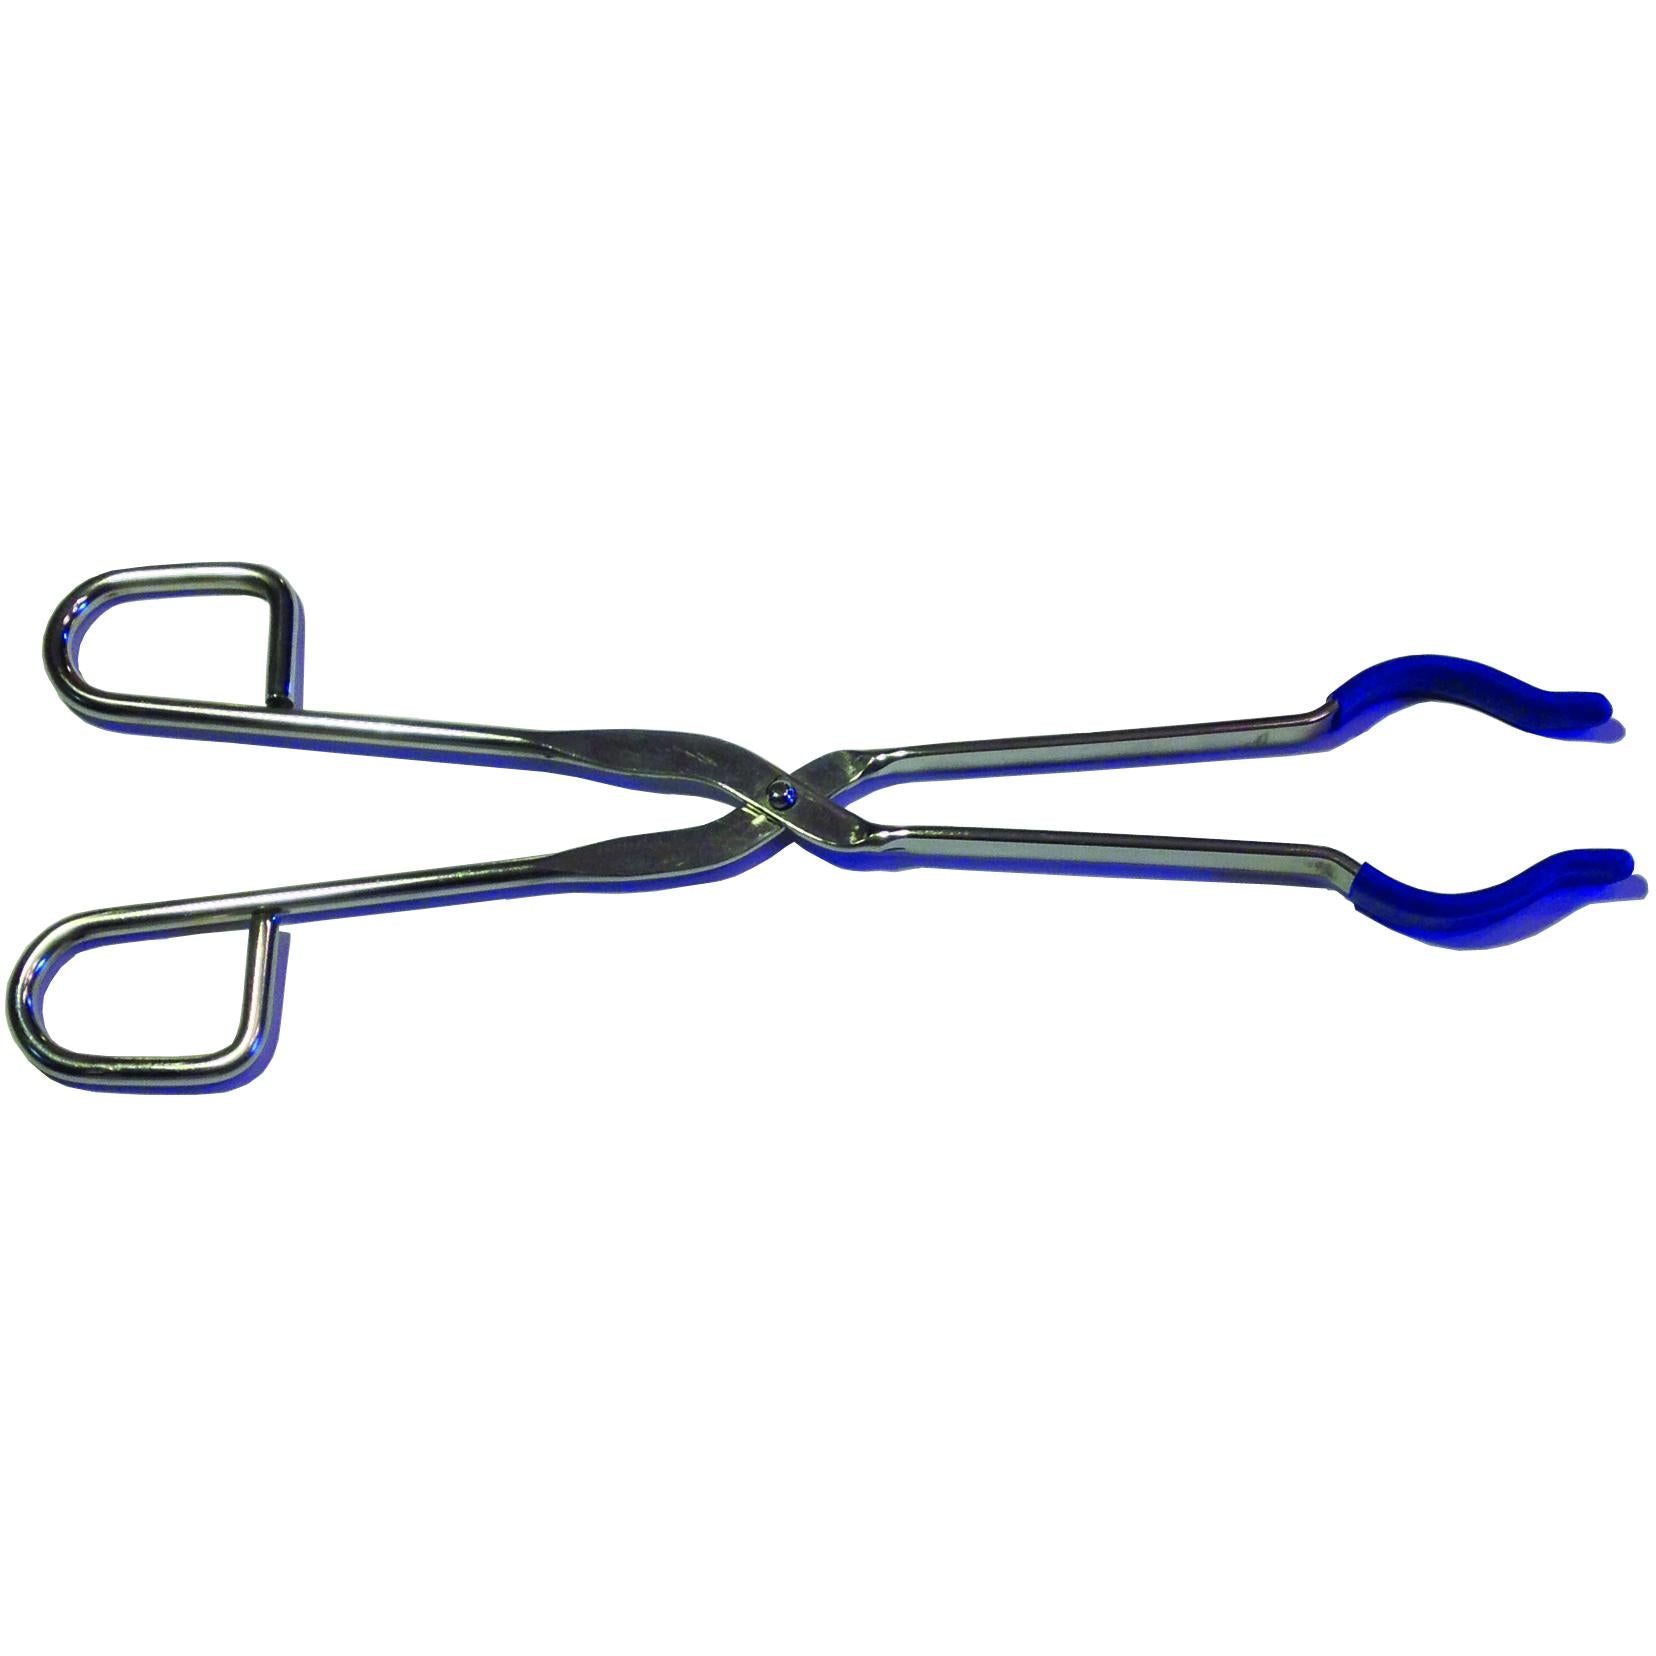 Flask Tongs, Stainless Steel, with Silicone Coated Grips